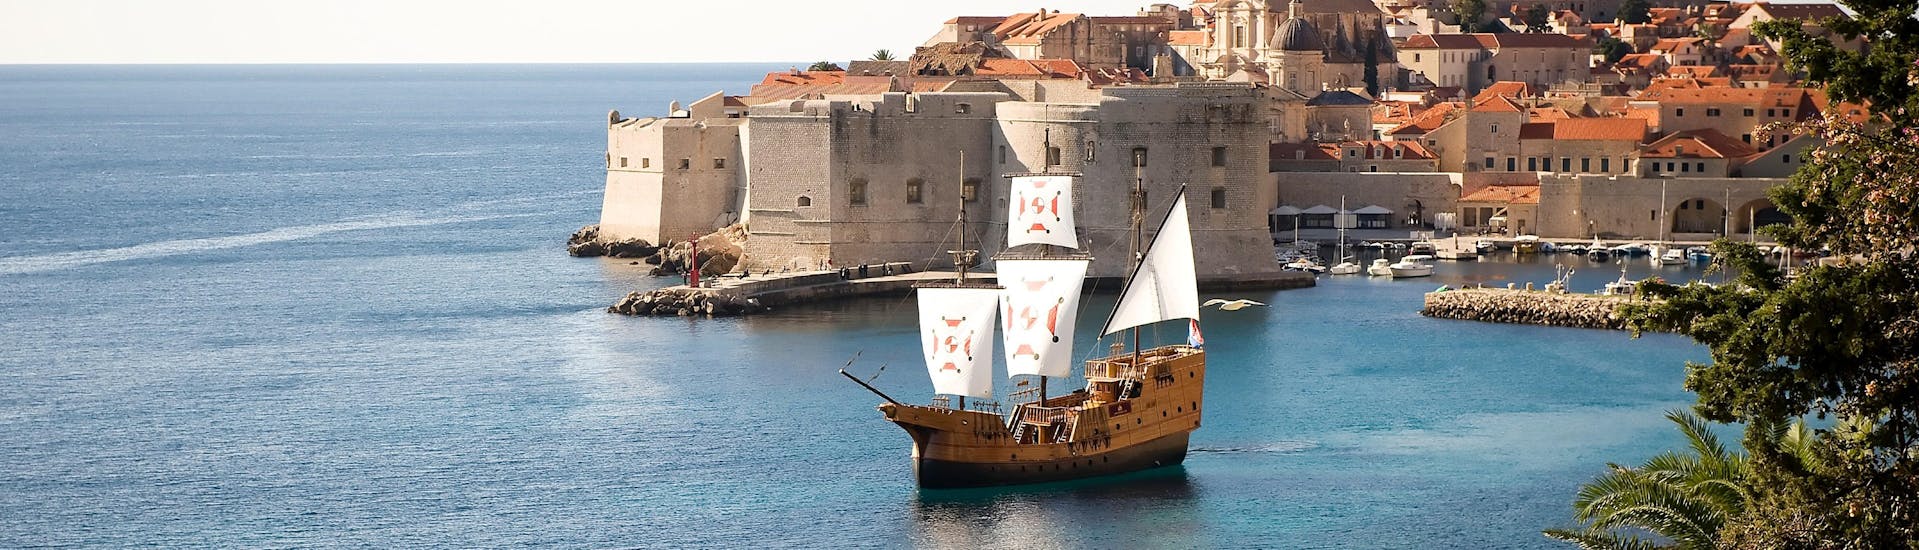 Picture of the traditional Karaka ship used by Karaka Dubrovnik for the boat trips.